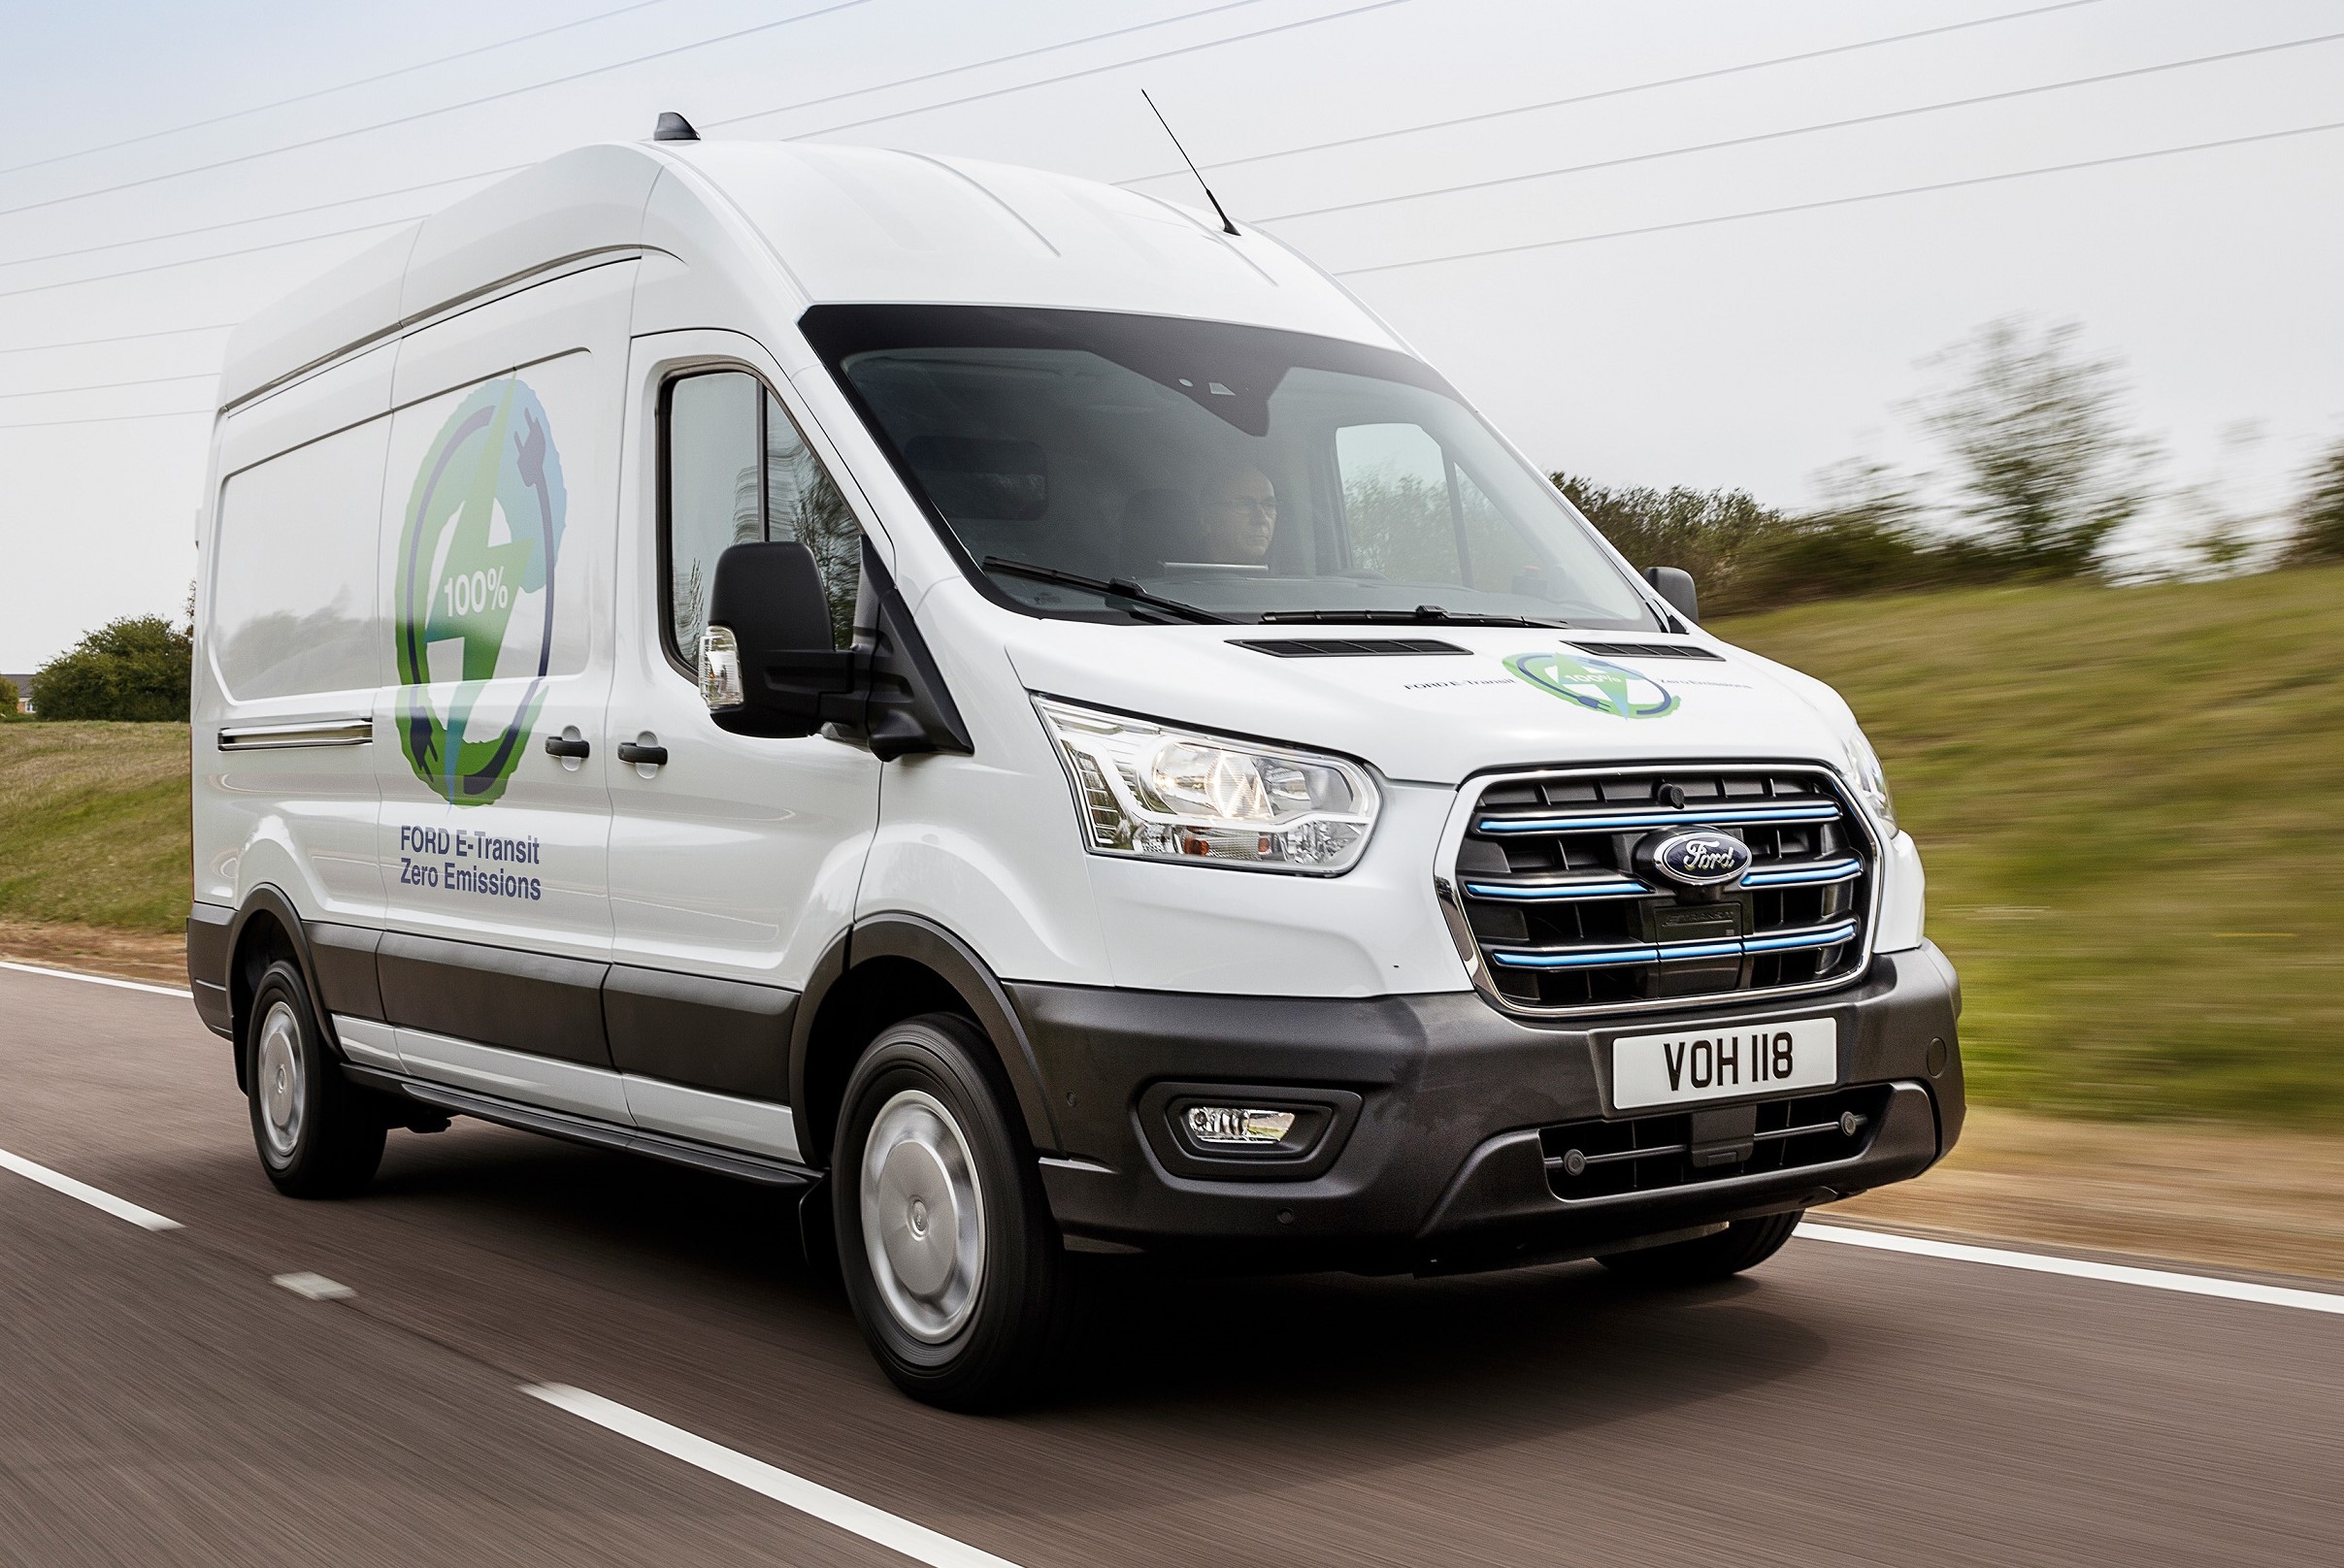 Trials of the Ford e-Transit begin - CommercialVehicle.com